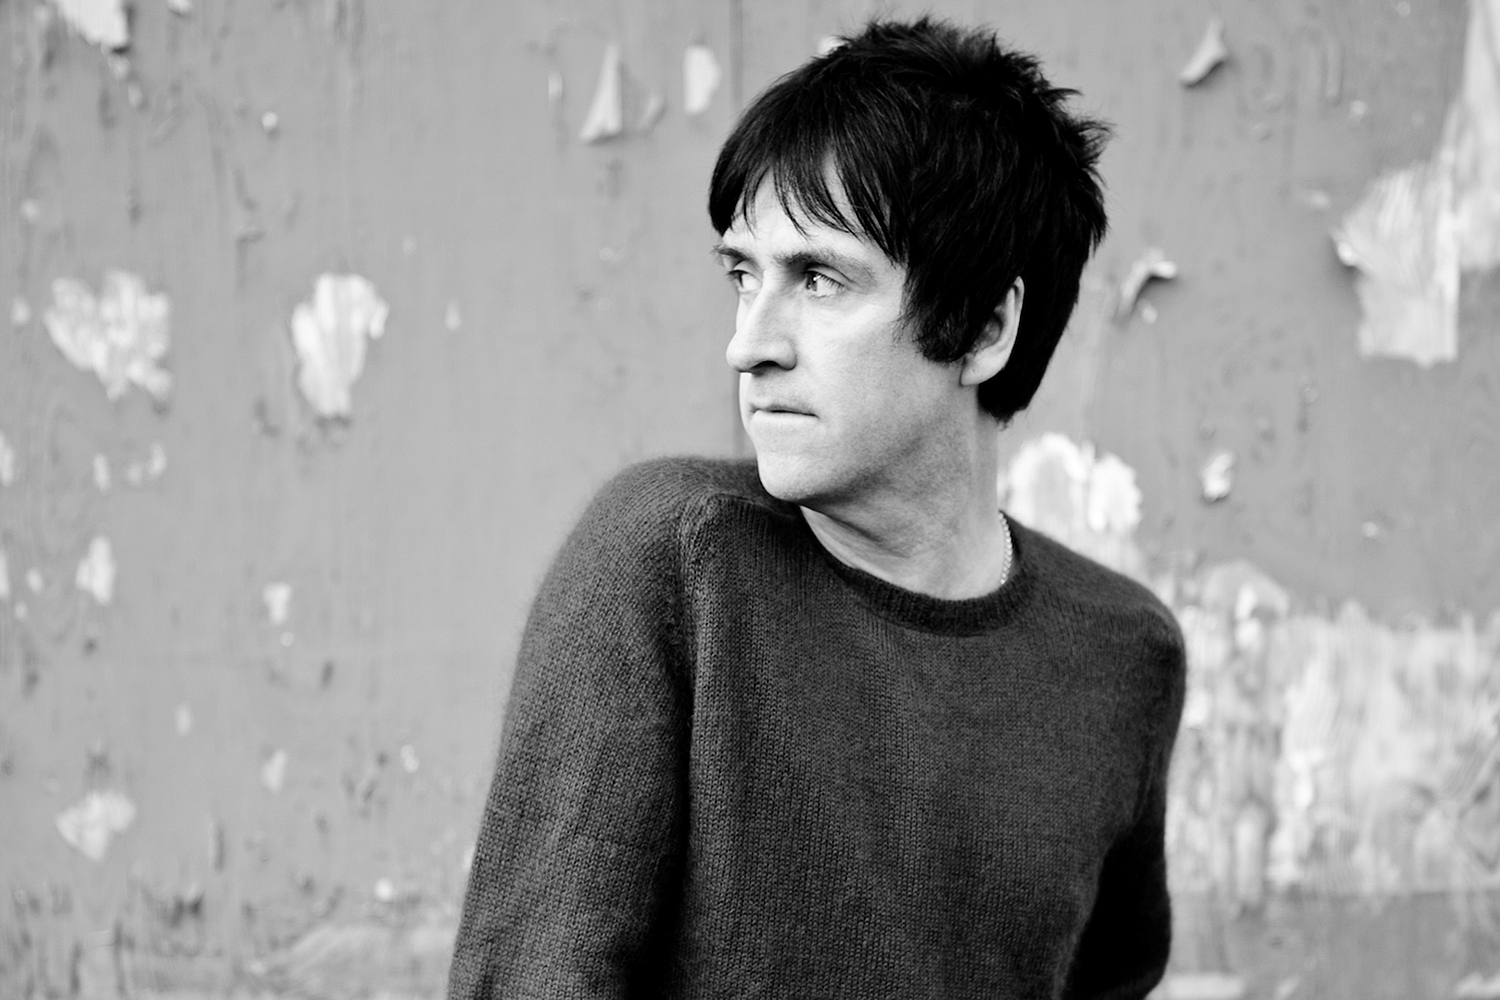 Johnny Marr unveils ‘The Trap’ song from new LP